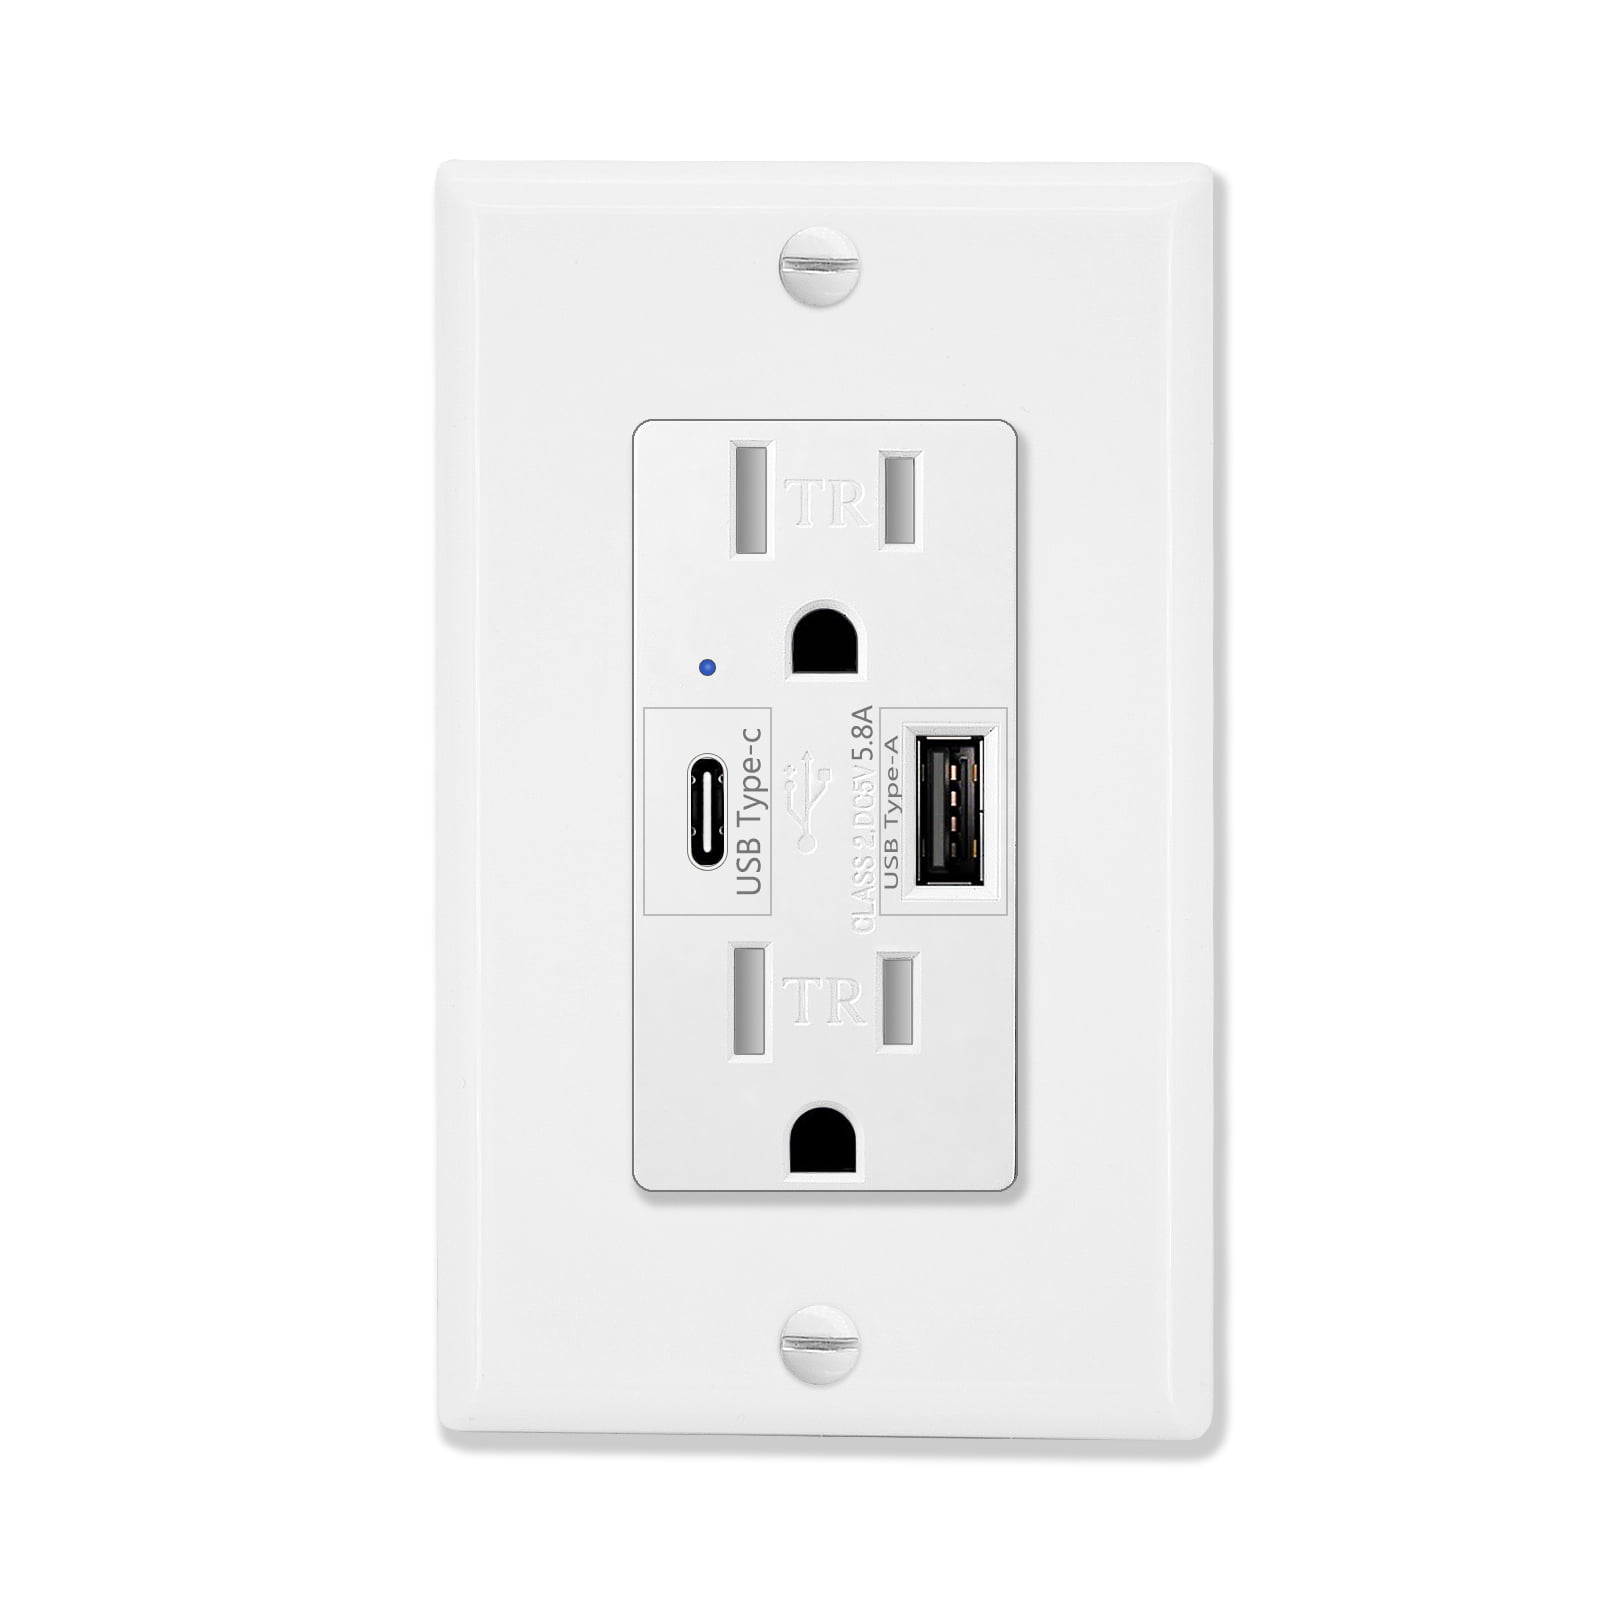 Dual USB Port Wall Socket Charger AC Power Receptacle Outlet Plate Panel 15A 110 